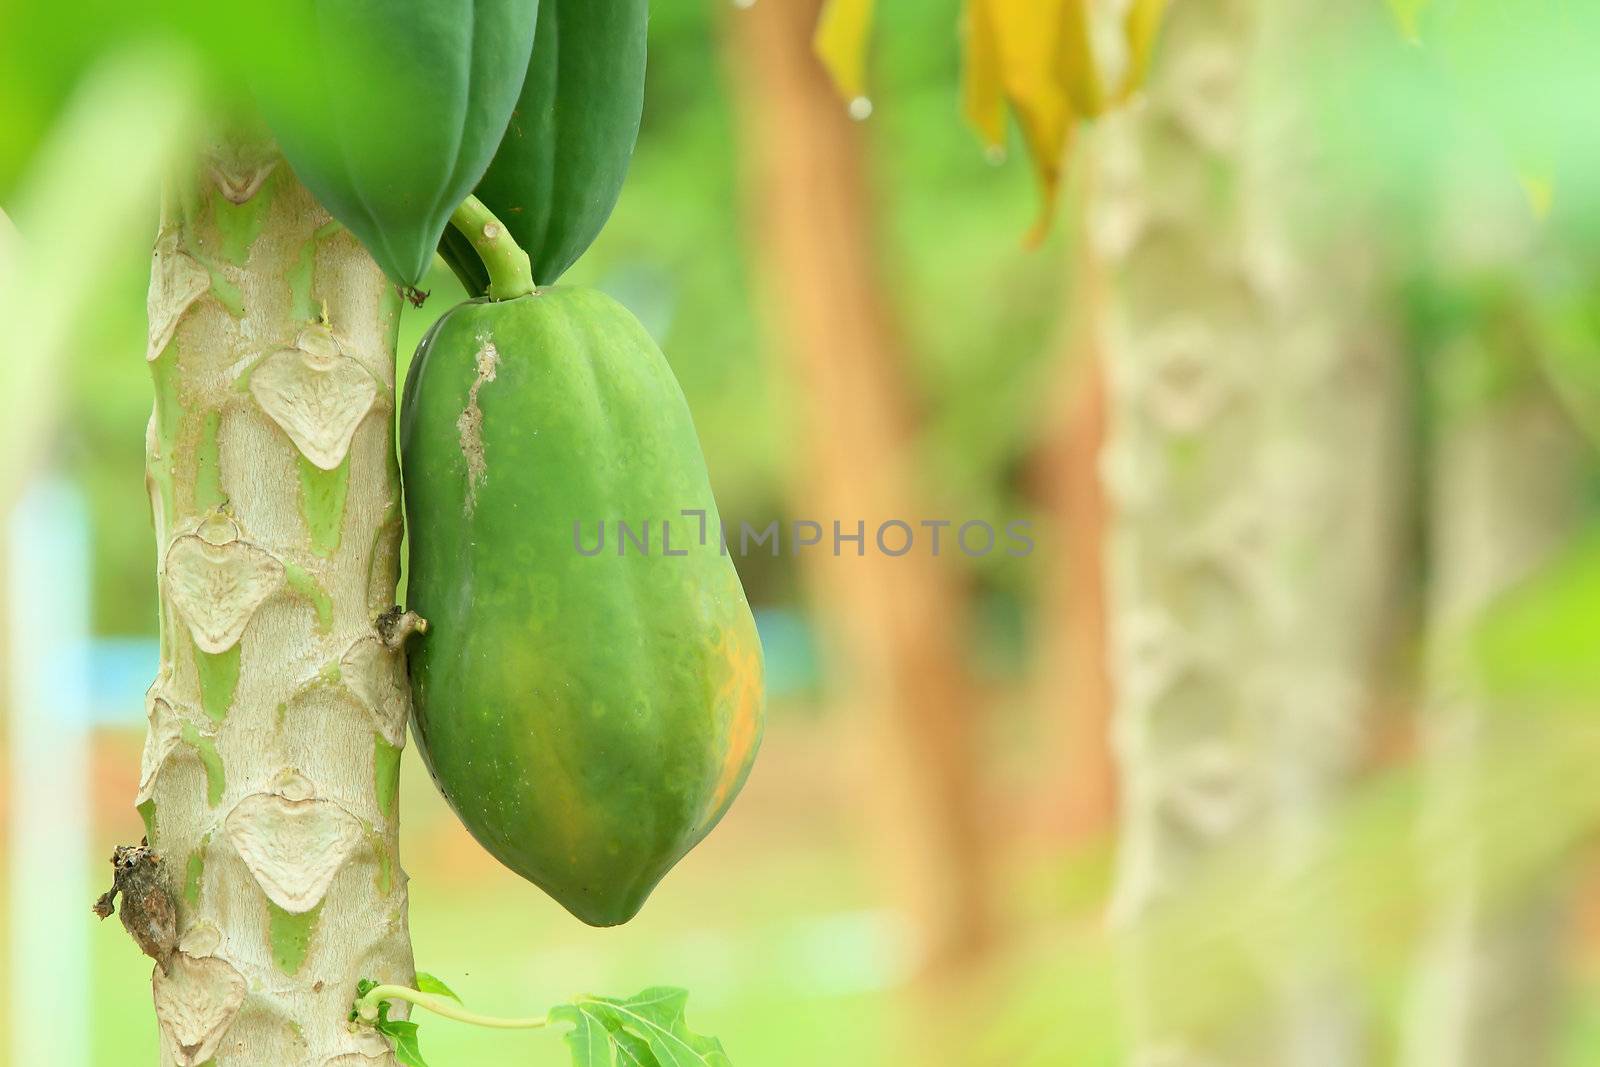 Bunch of Papayas hanging from the tree